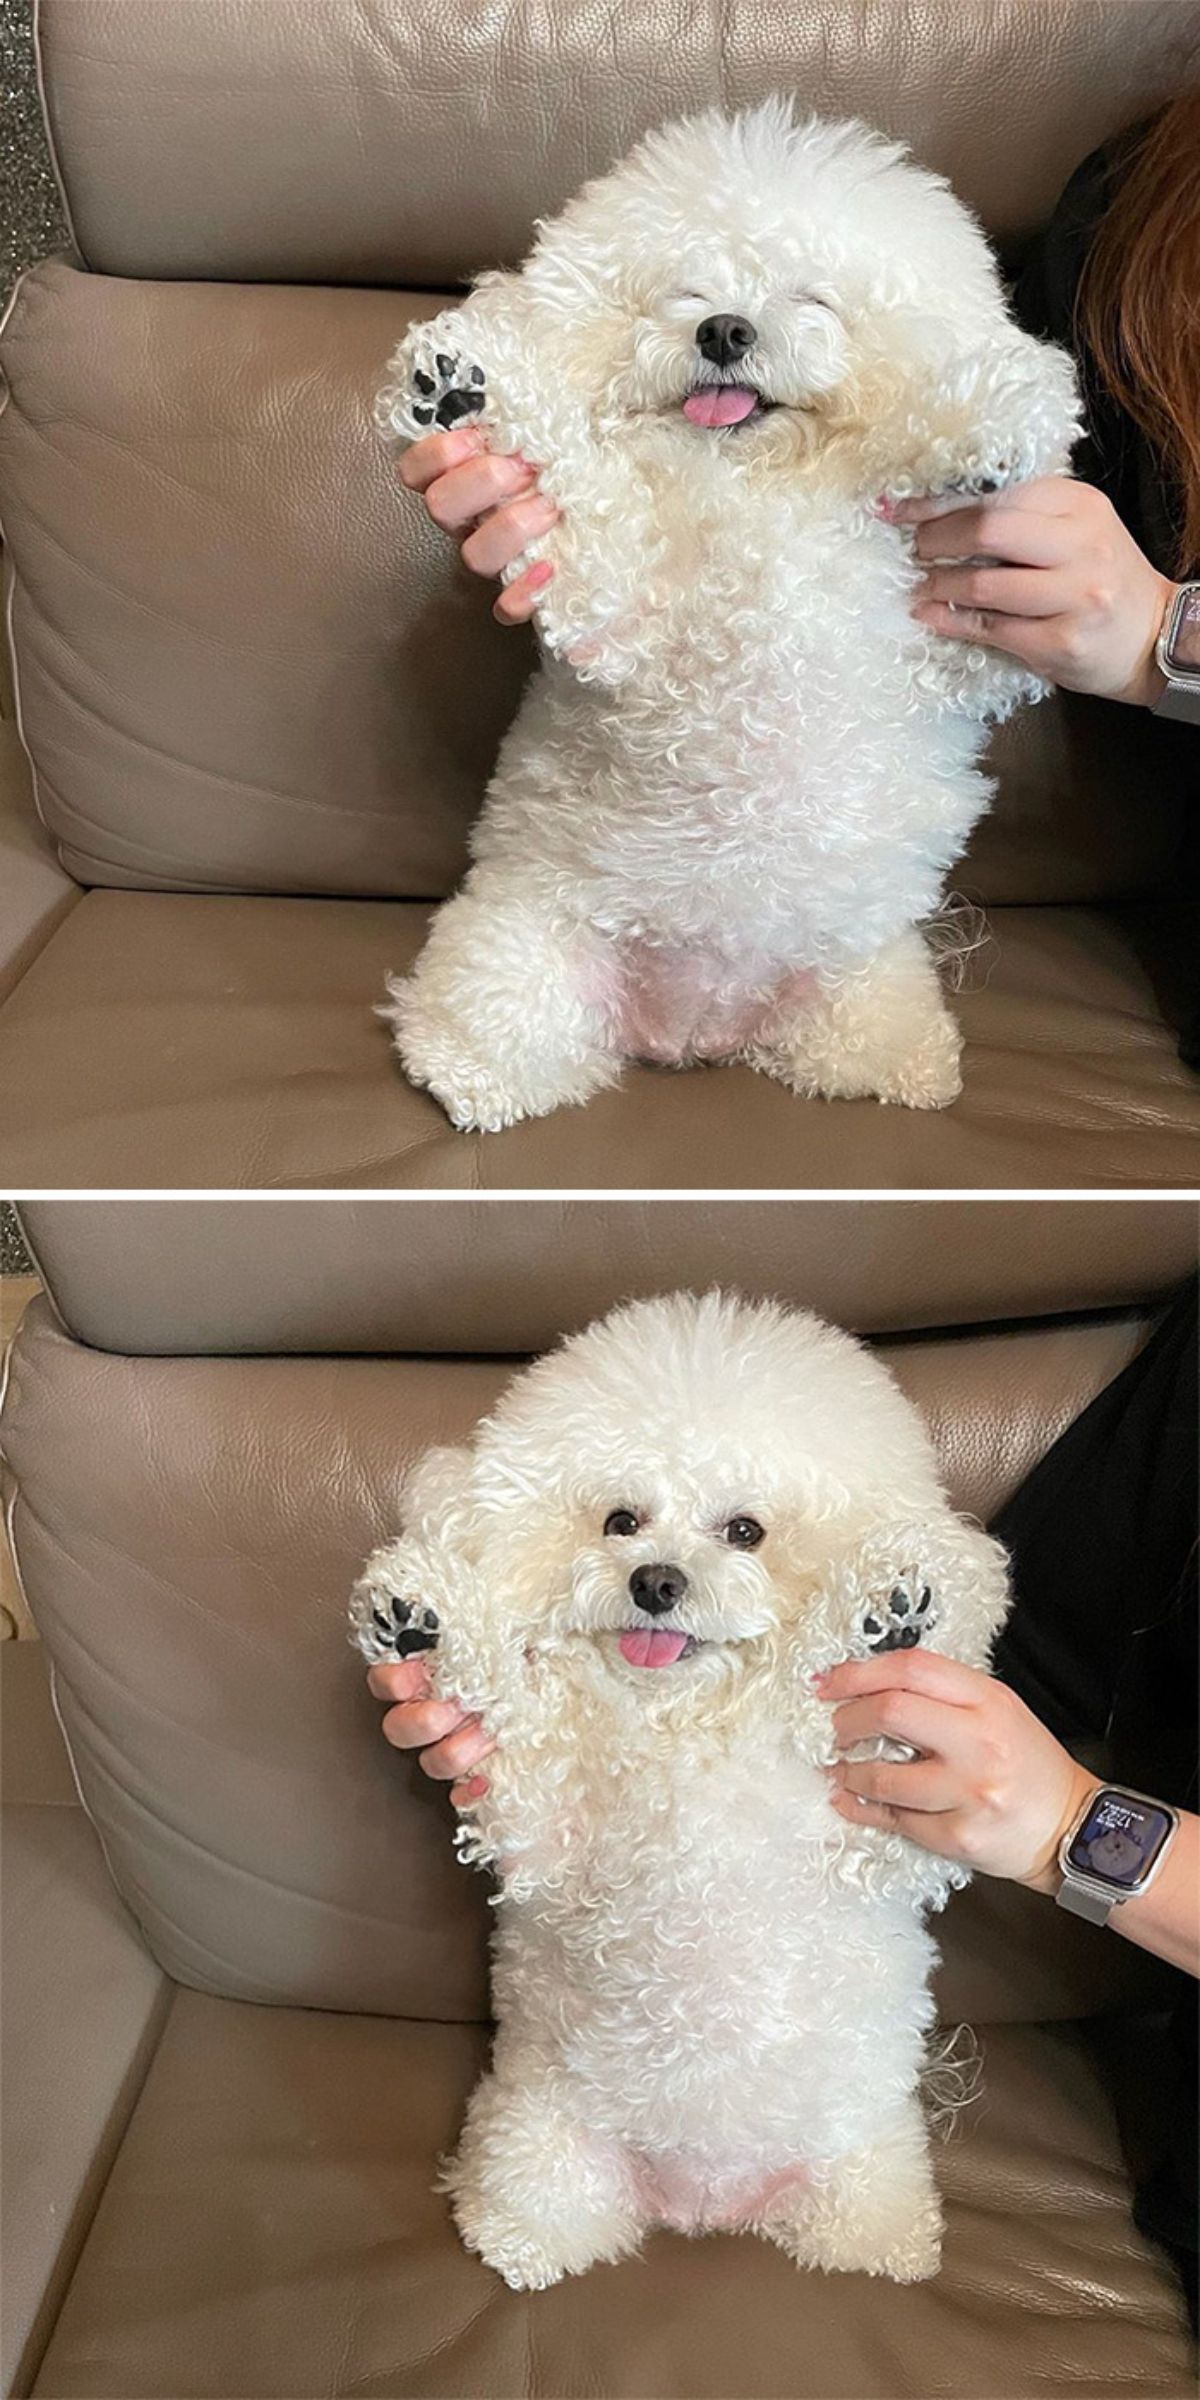 2 photos of a small fluffy white dog being held up by front paws to stand on a brown sofa